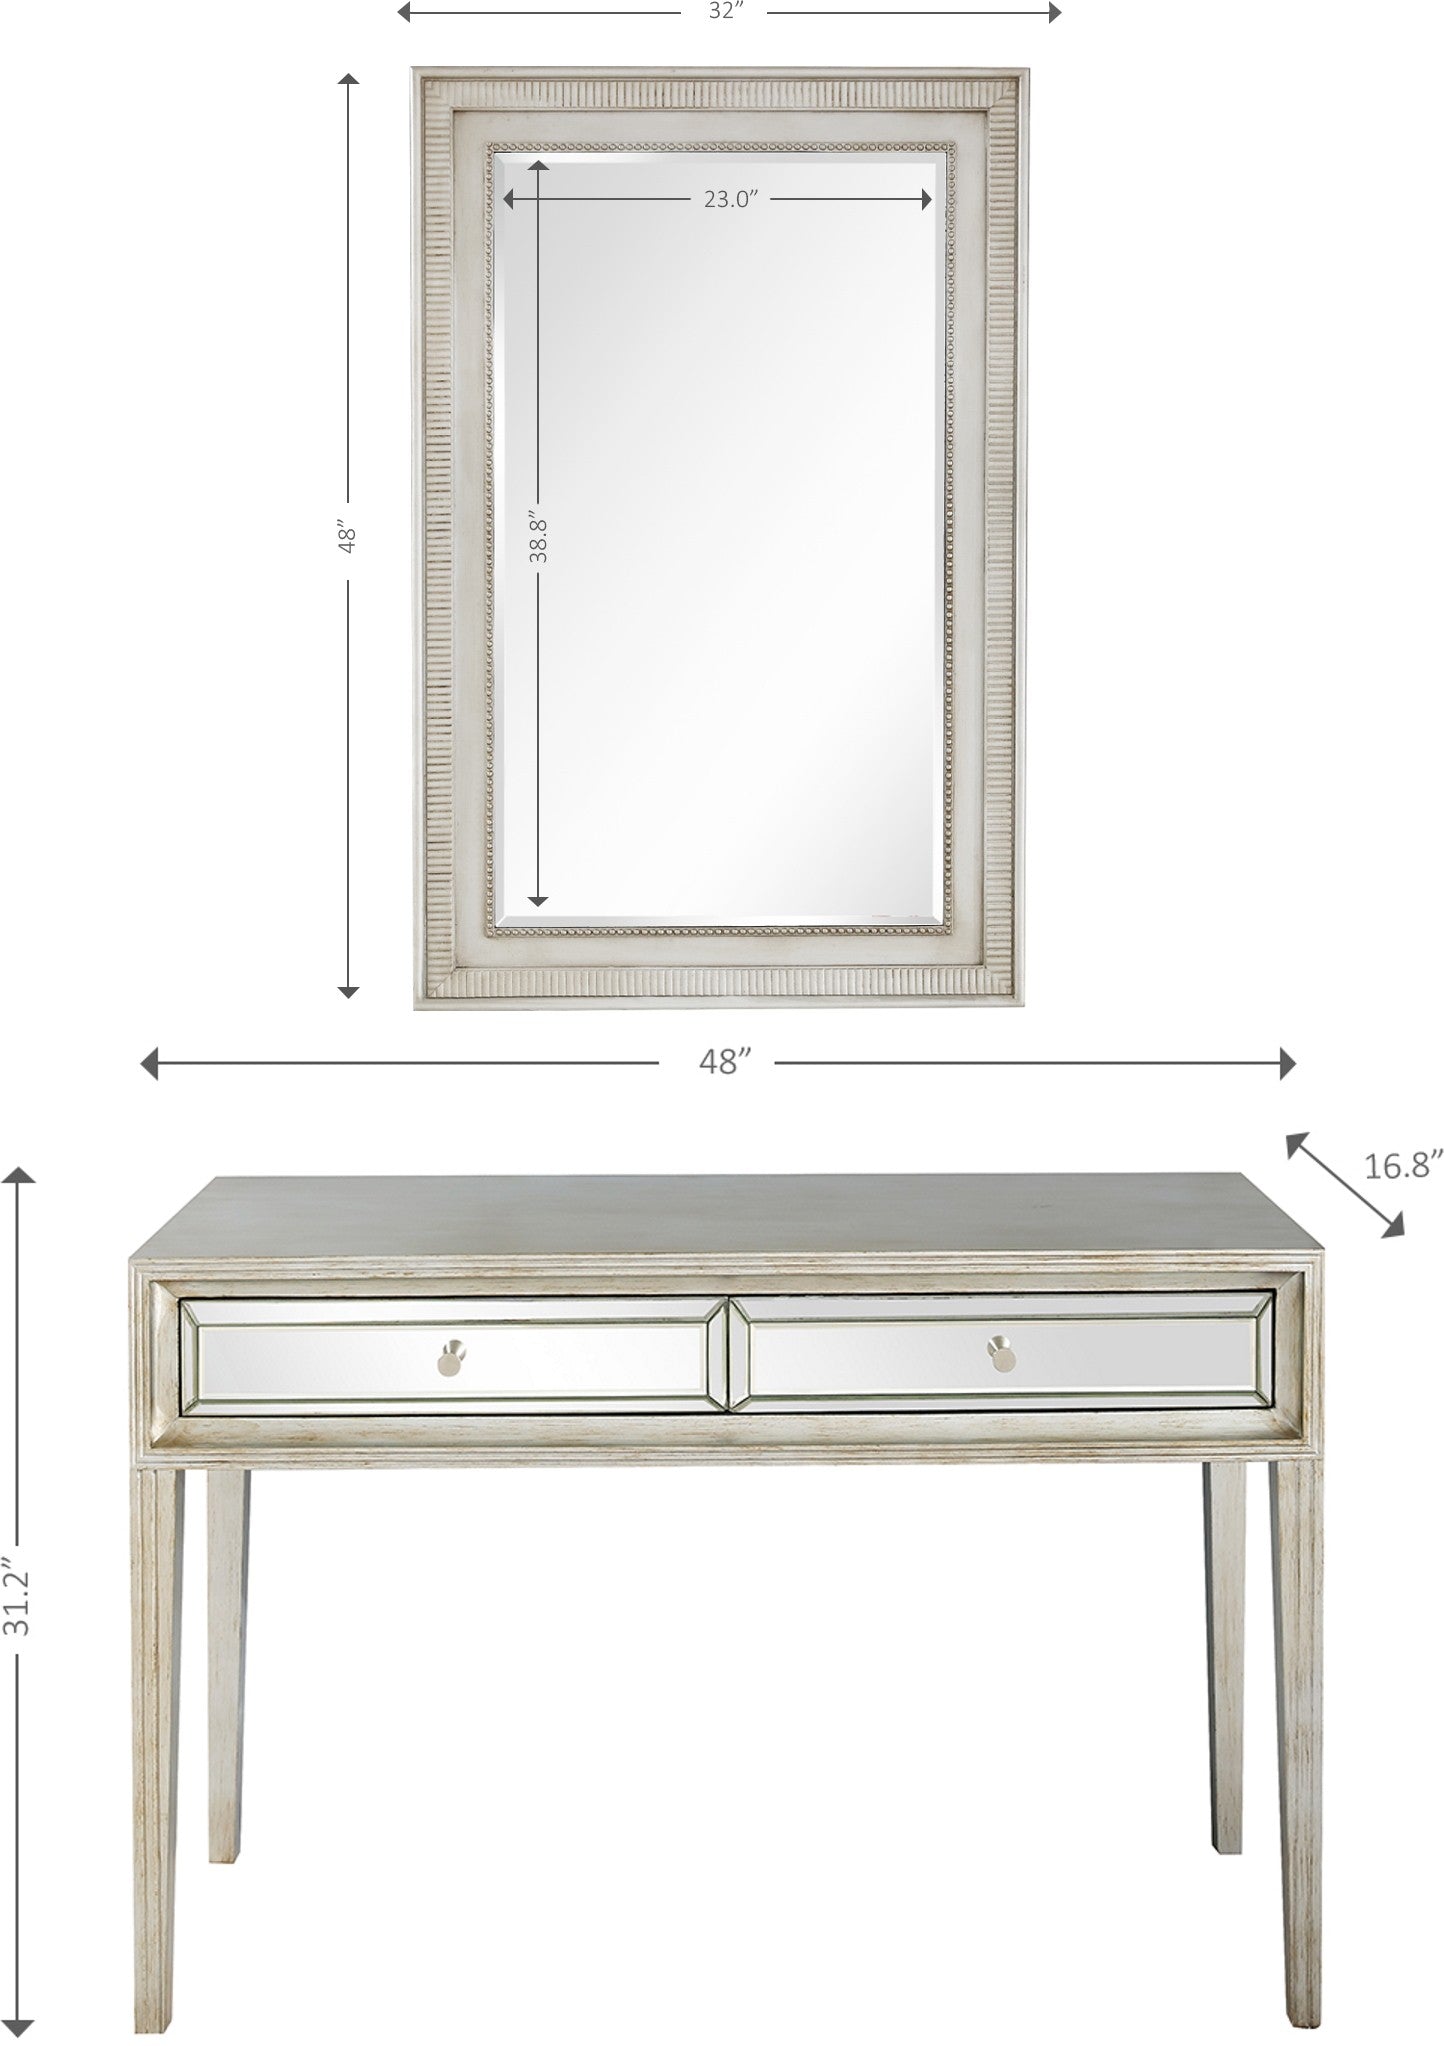 Antiqued Silver Finish Mirror and Console Table By Homeroots